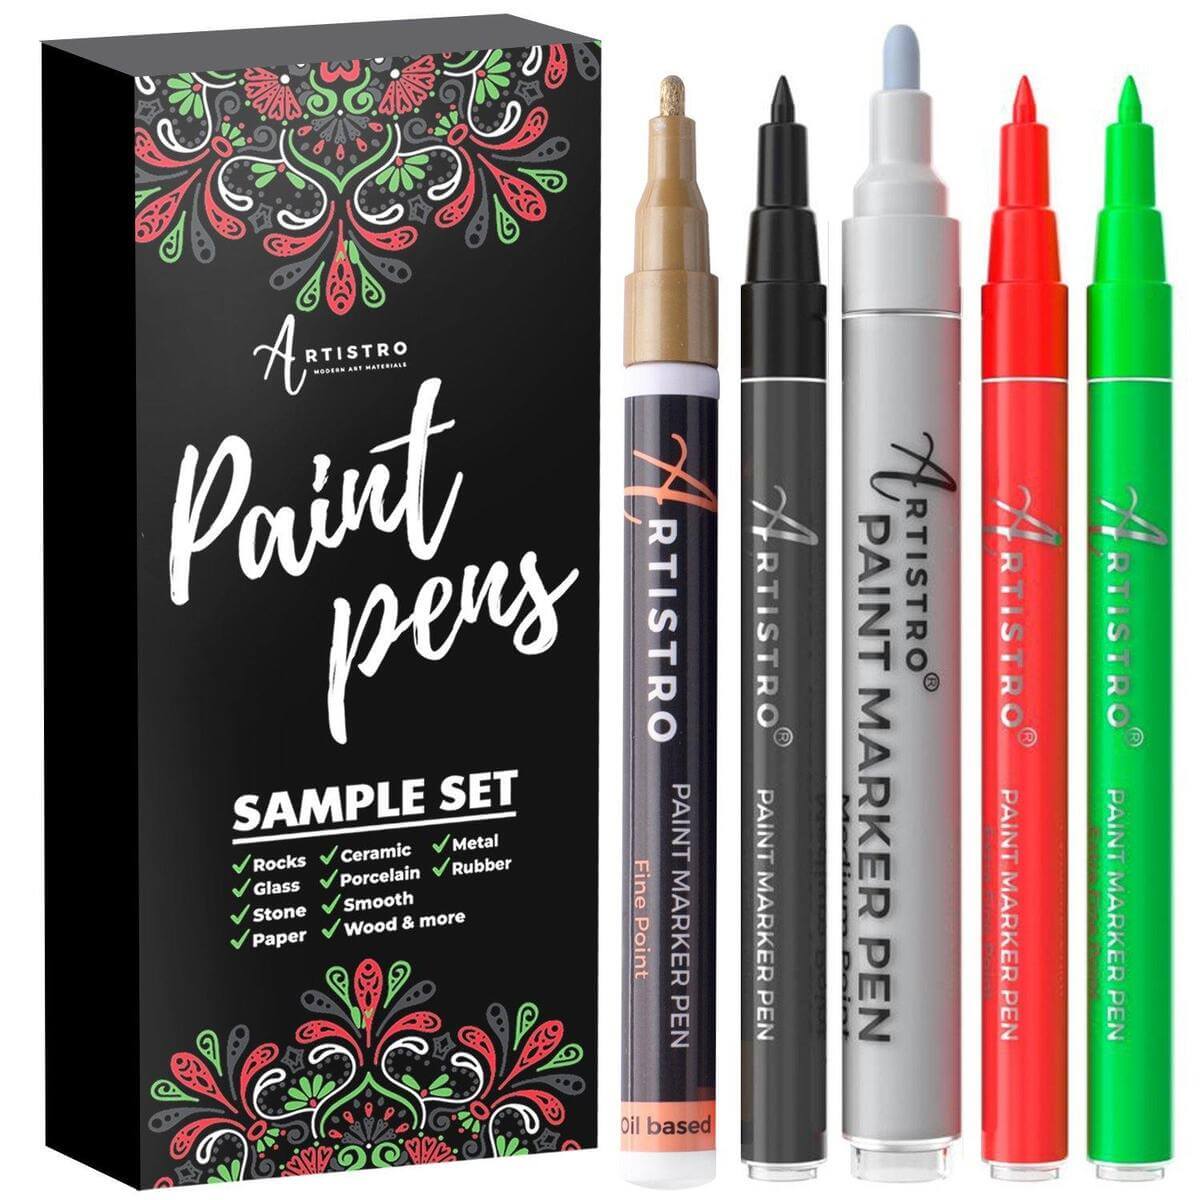 ARTISTRO Outline Markers, 16 Outline Pens, 5 Cards, Gold and